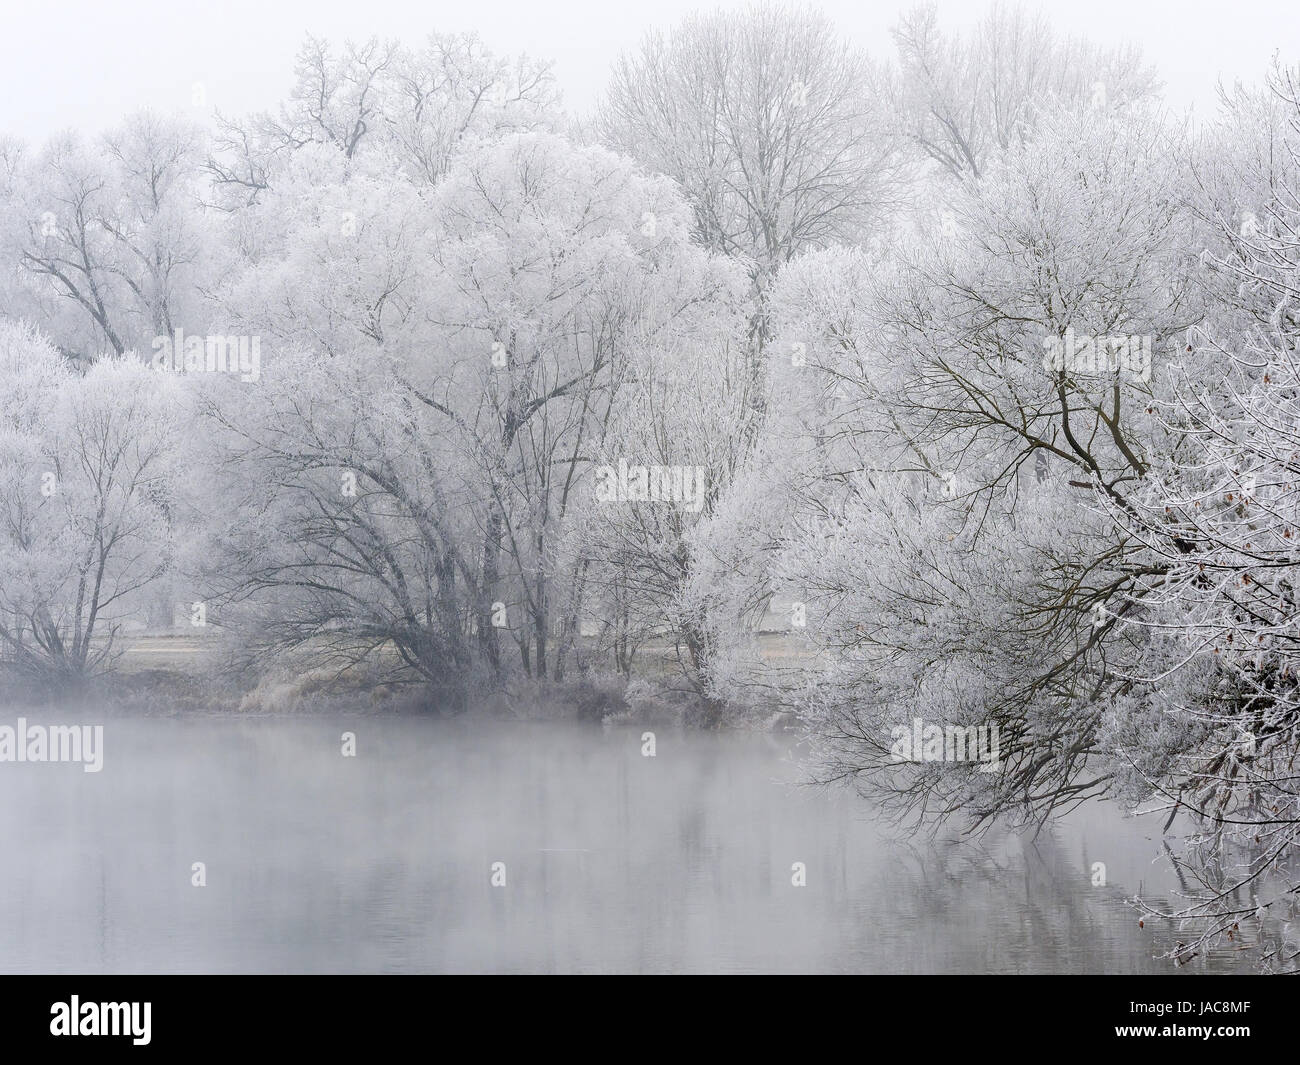 Scenery with trees and hoarfrost with cold in winter. Typical winter picture as a background., Landschaft mit Bäumen und Raureif bei Kälte im Winter.  Stock Photo